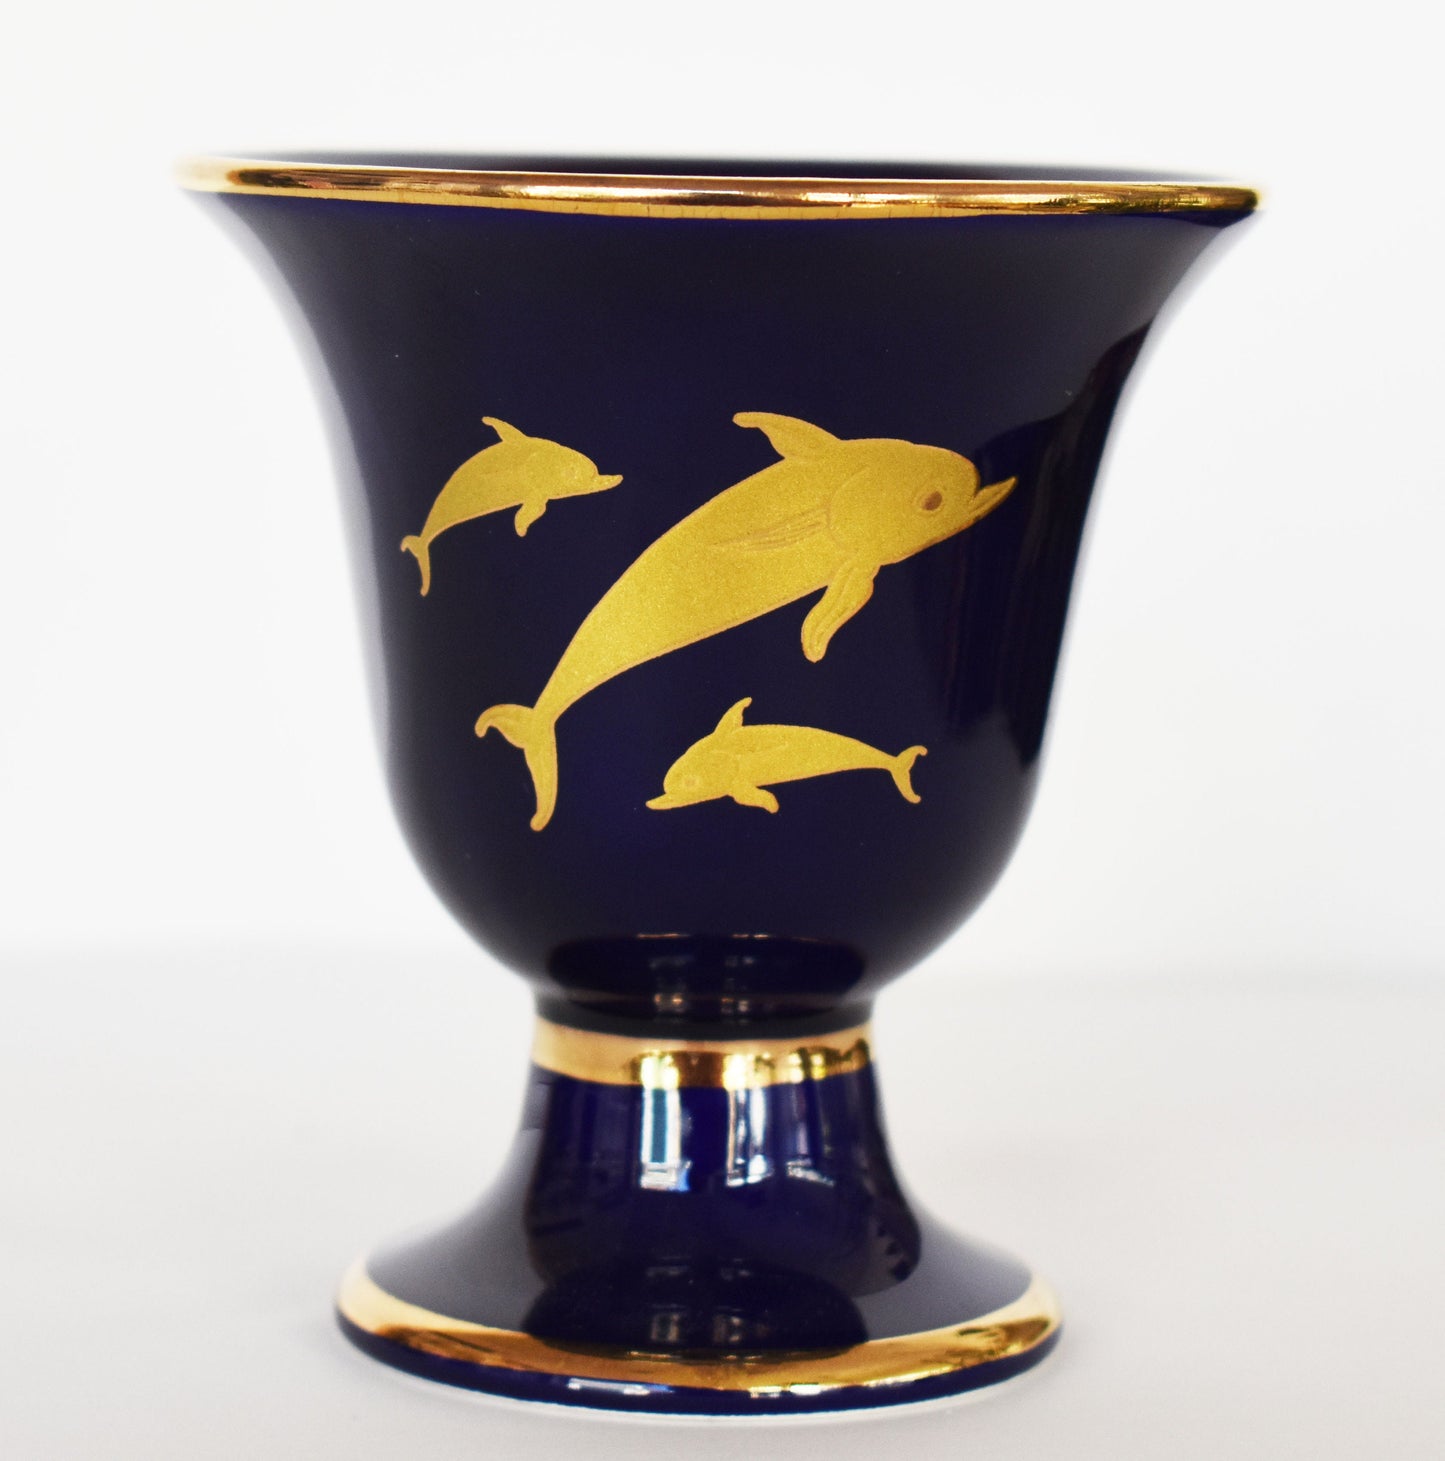 Pythagoras Cup - Fair Cup, Cup of Justice - Athenian Trireme - Dolphin, Poseidon's Symbol - Ceramic  - Handmade in Greece